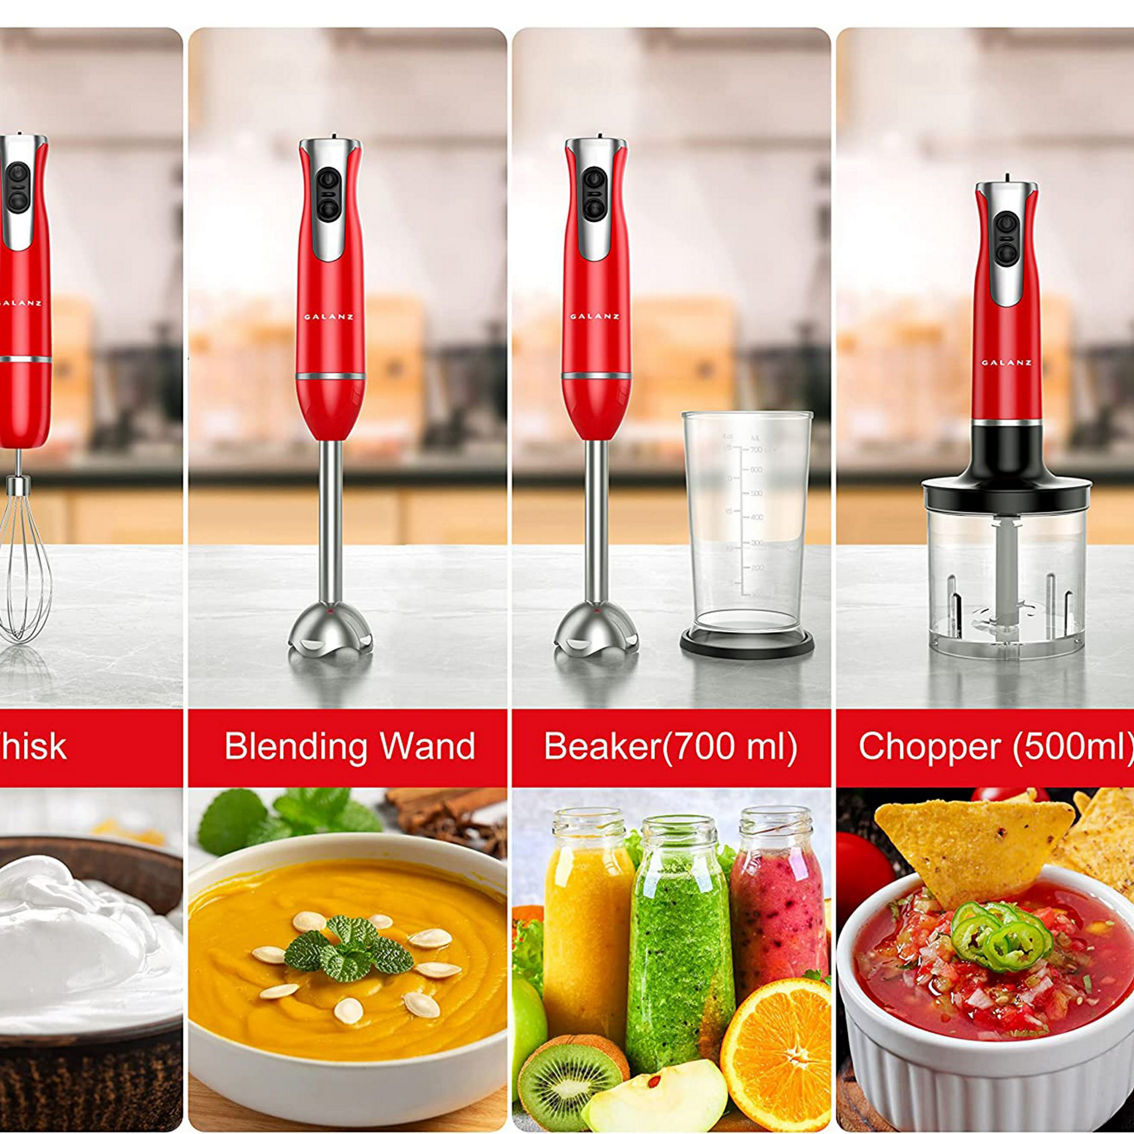 Galanz 2 Speed Multi-Function Retro Immersion Hand Blender in Hot Rod Red - Image 2 of 5